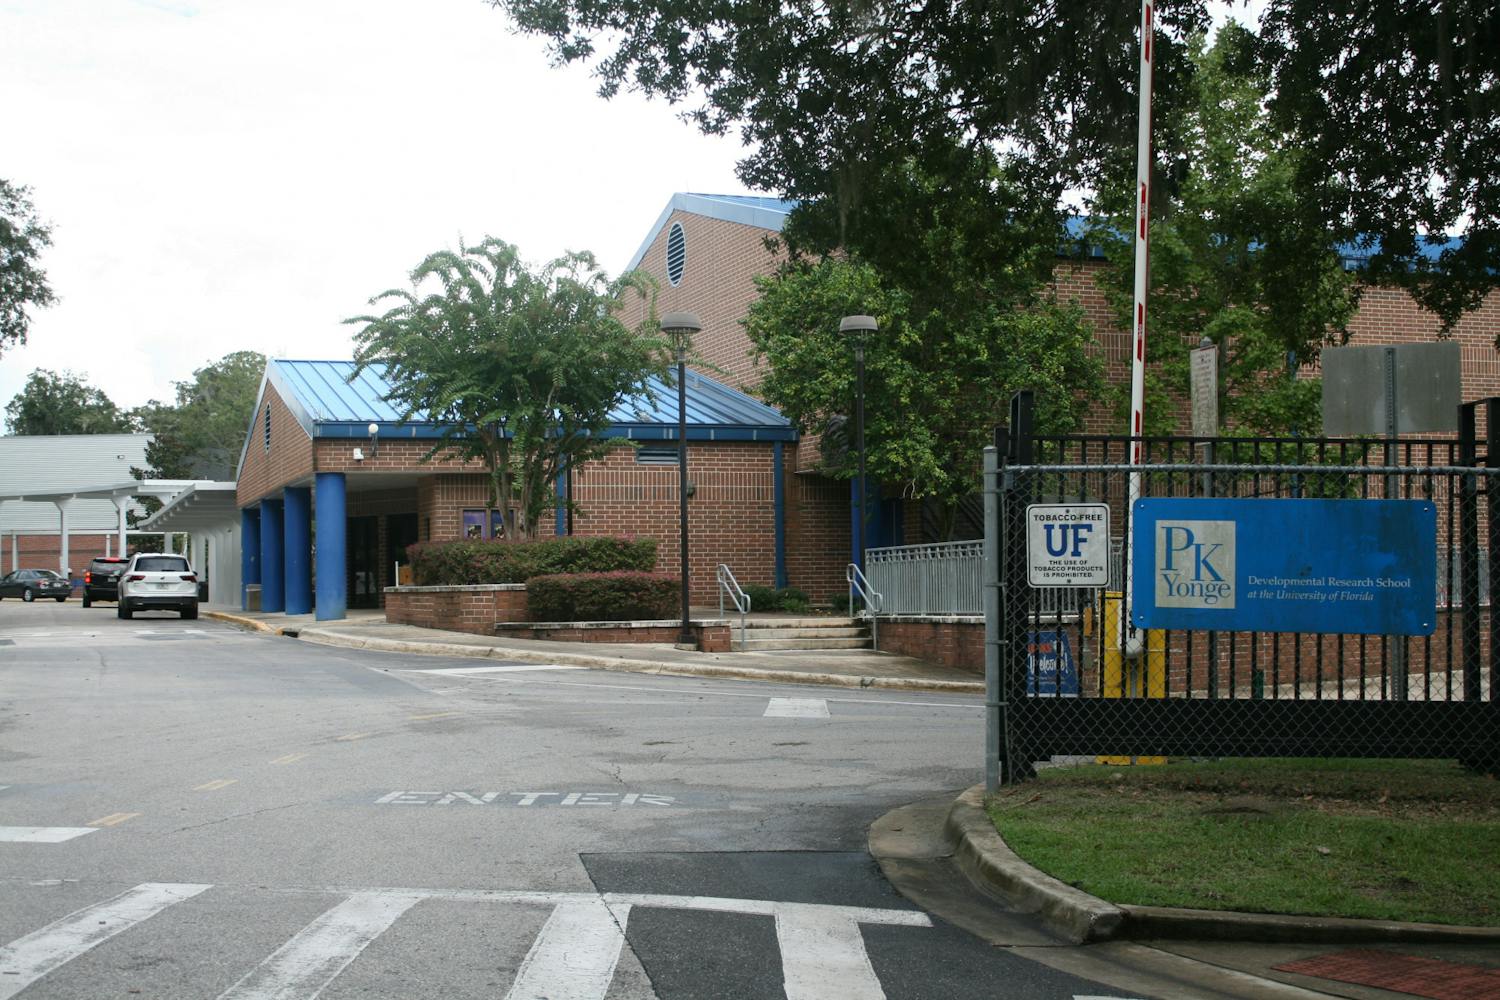 P.K. Yonge is one of four Florida K-12 schools directly affiliated with a university.